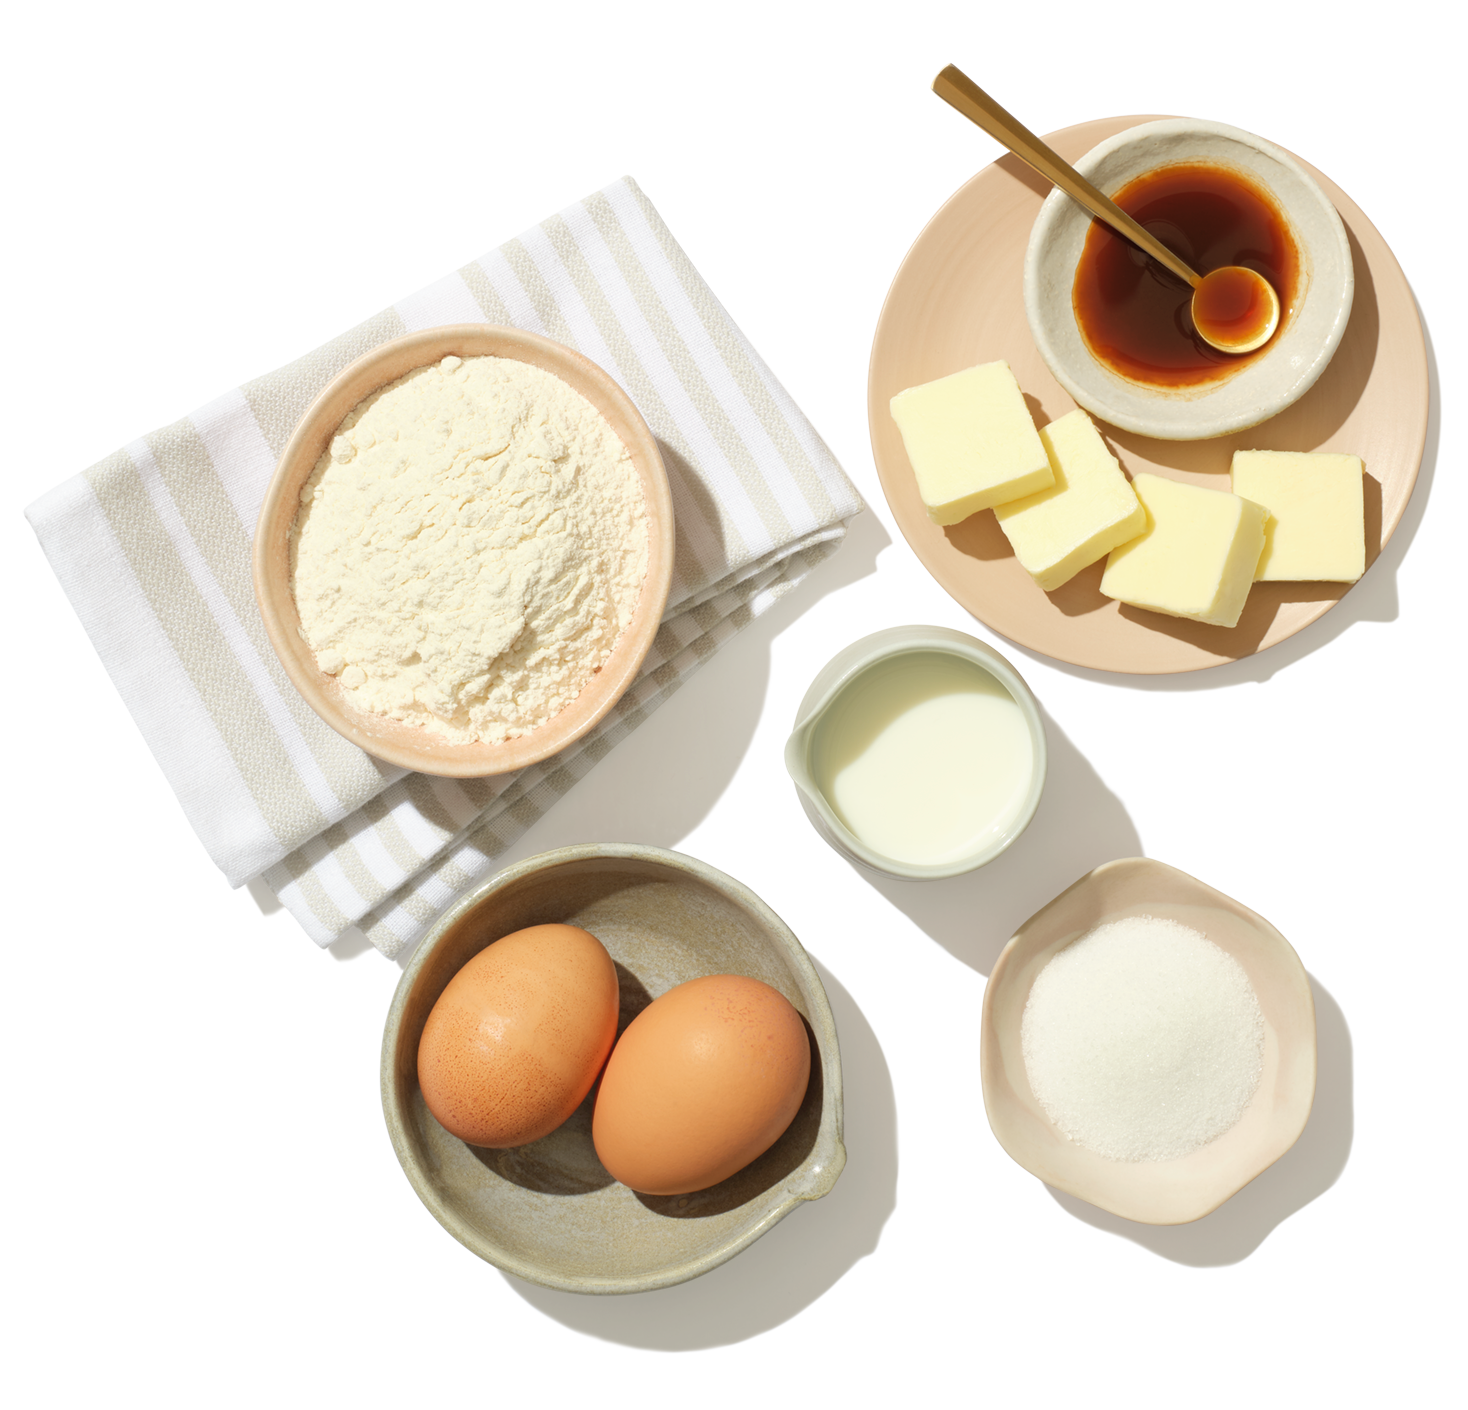 Several bowls with pre-measured ingredients sits on a table top including eggs, sugar, butter, flour and milk.